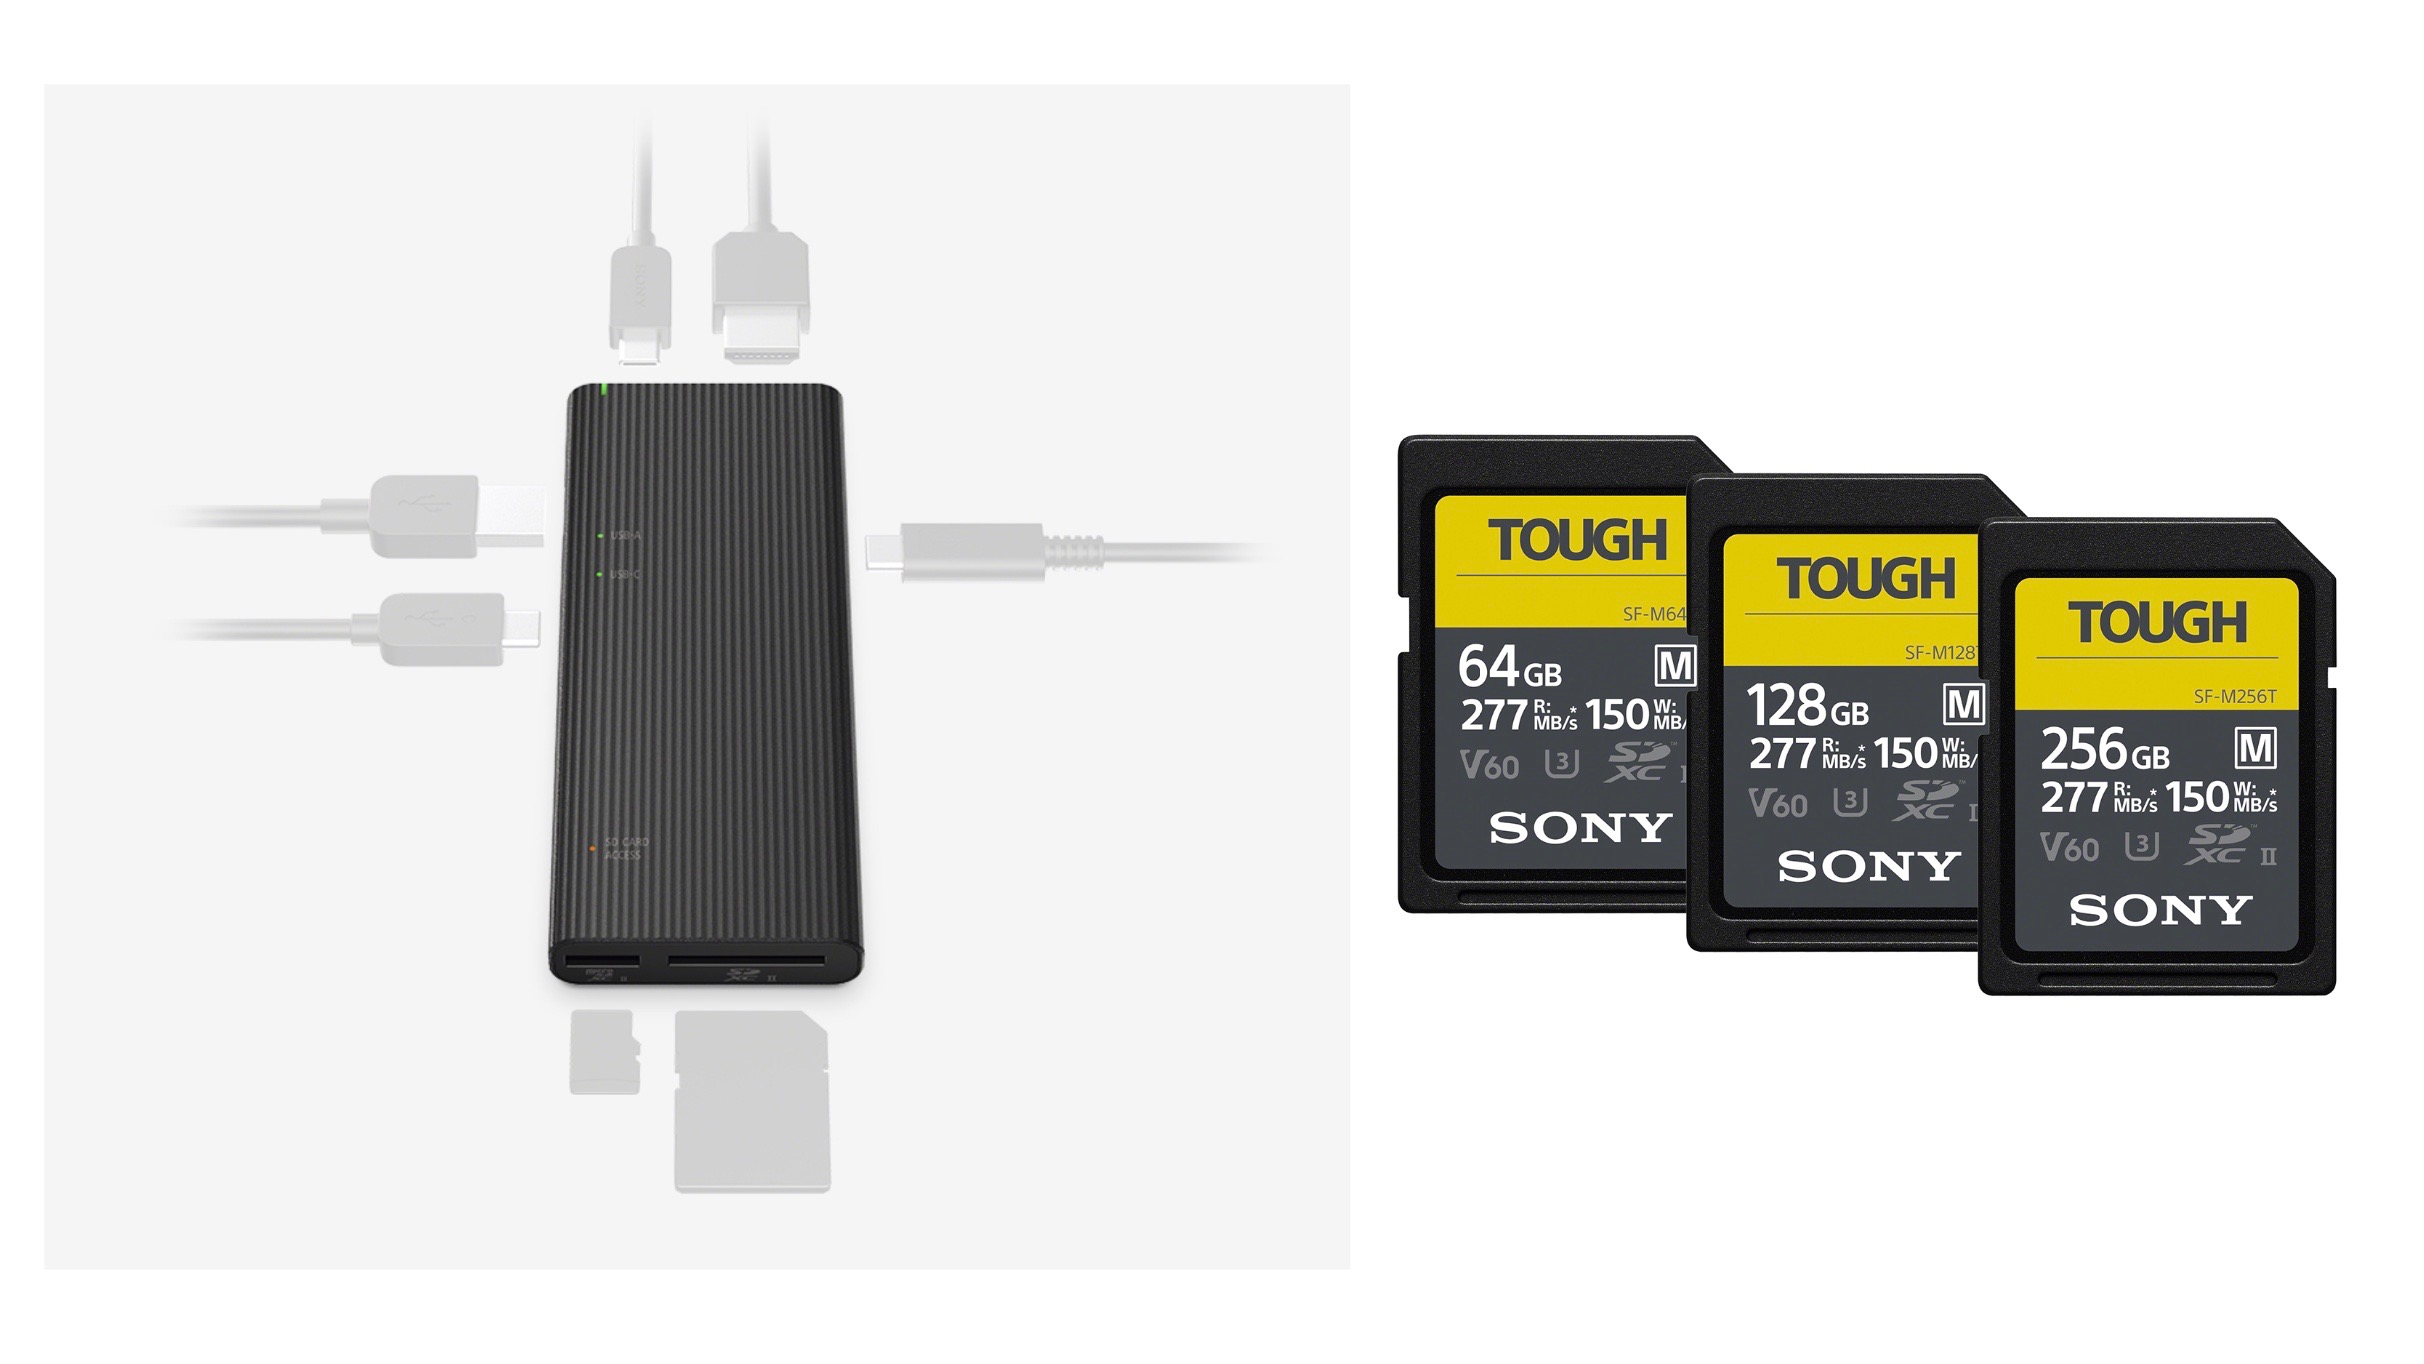 SONY Fast USB 3.1 UHS-II SD Card Reader for UHS-II & UHS-I SDHC & SDXC Cards. 